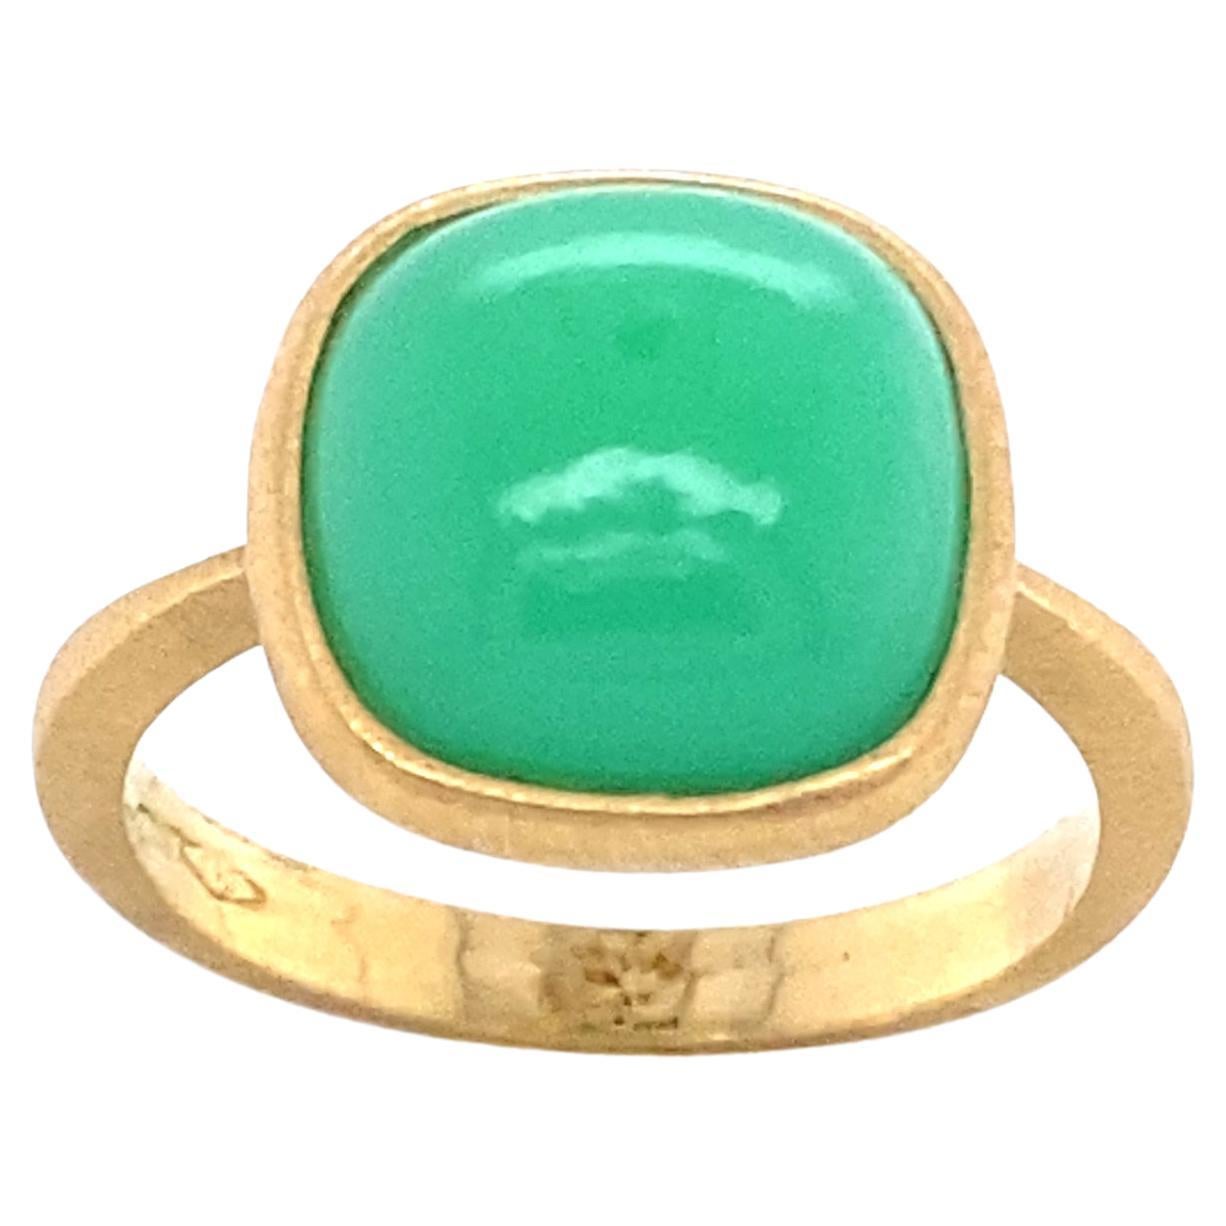 Brushed Yellow Gold with a Cabochon Crisaprasio Cocktail Ring